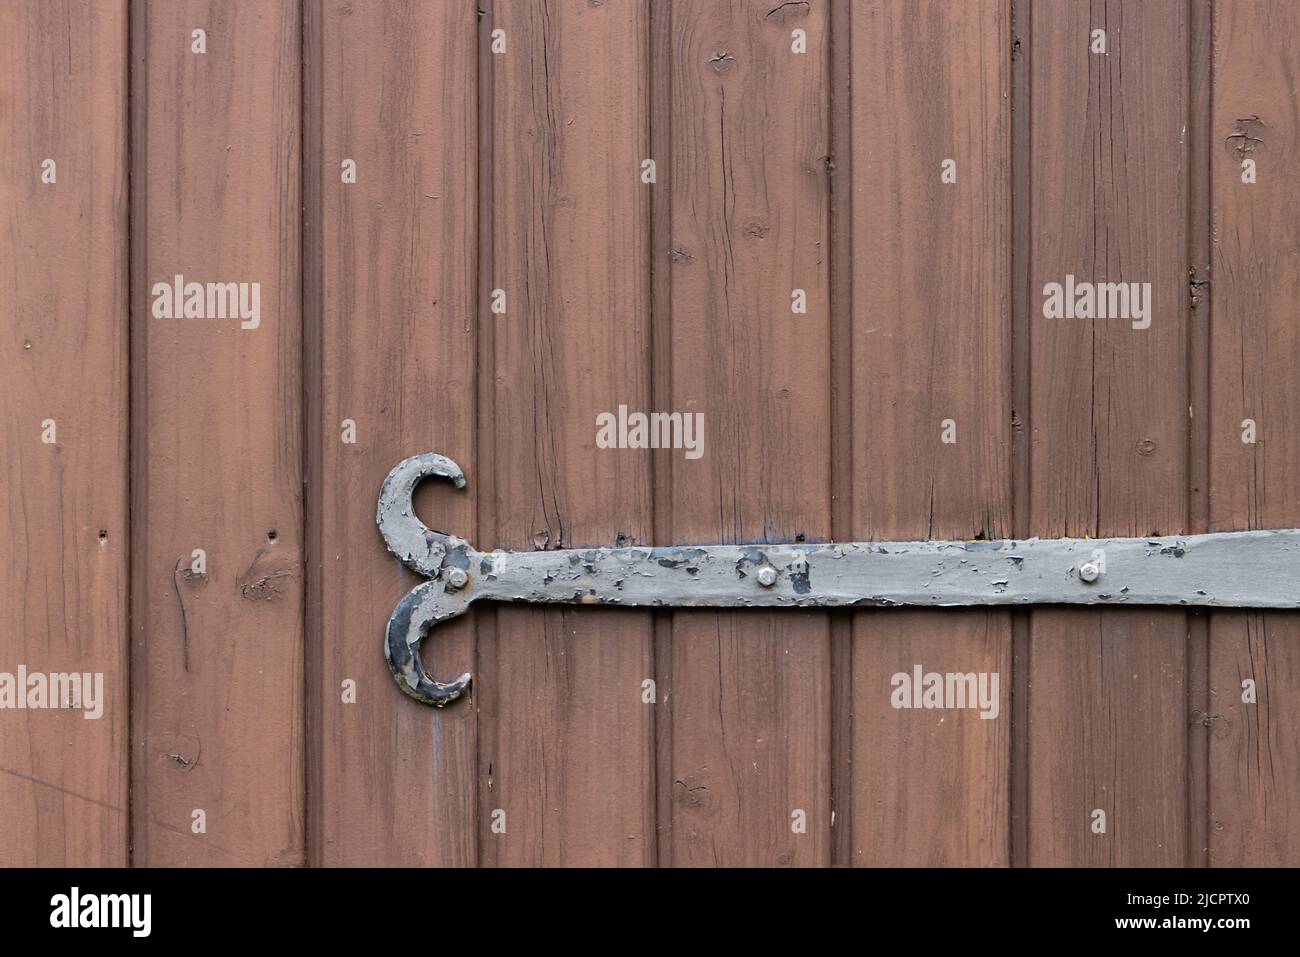 Old metal fitting on a wooden door for background with copy space Stock Photo